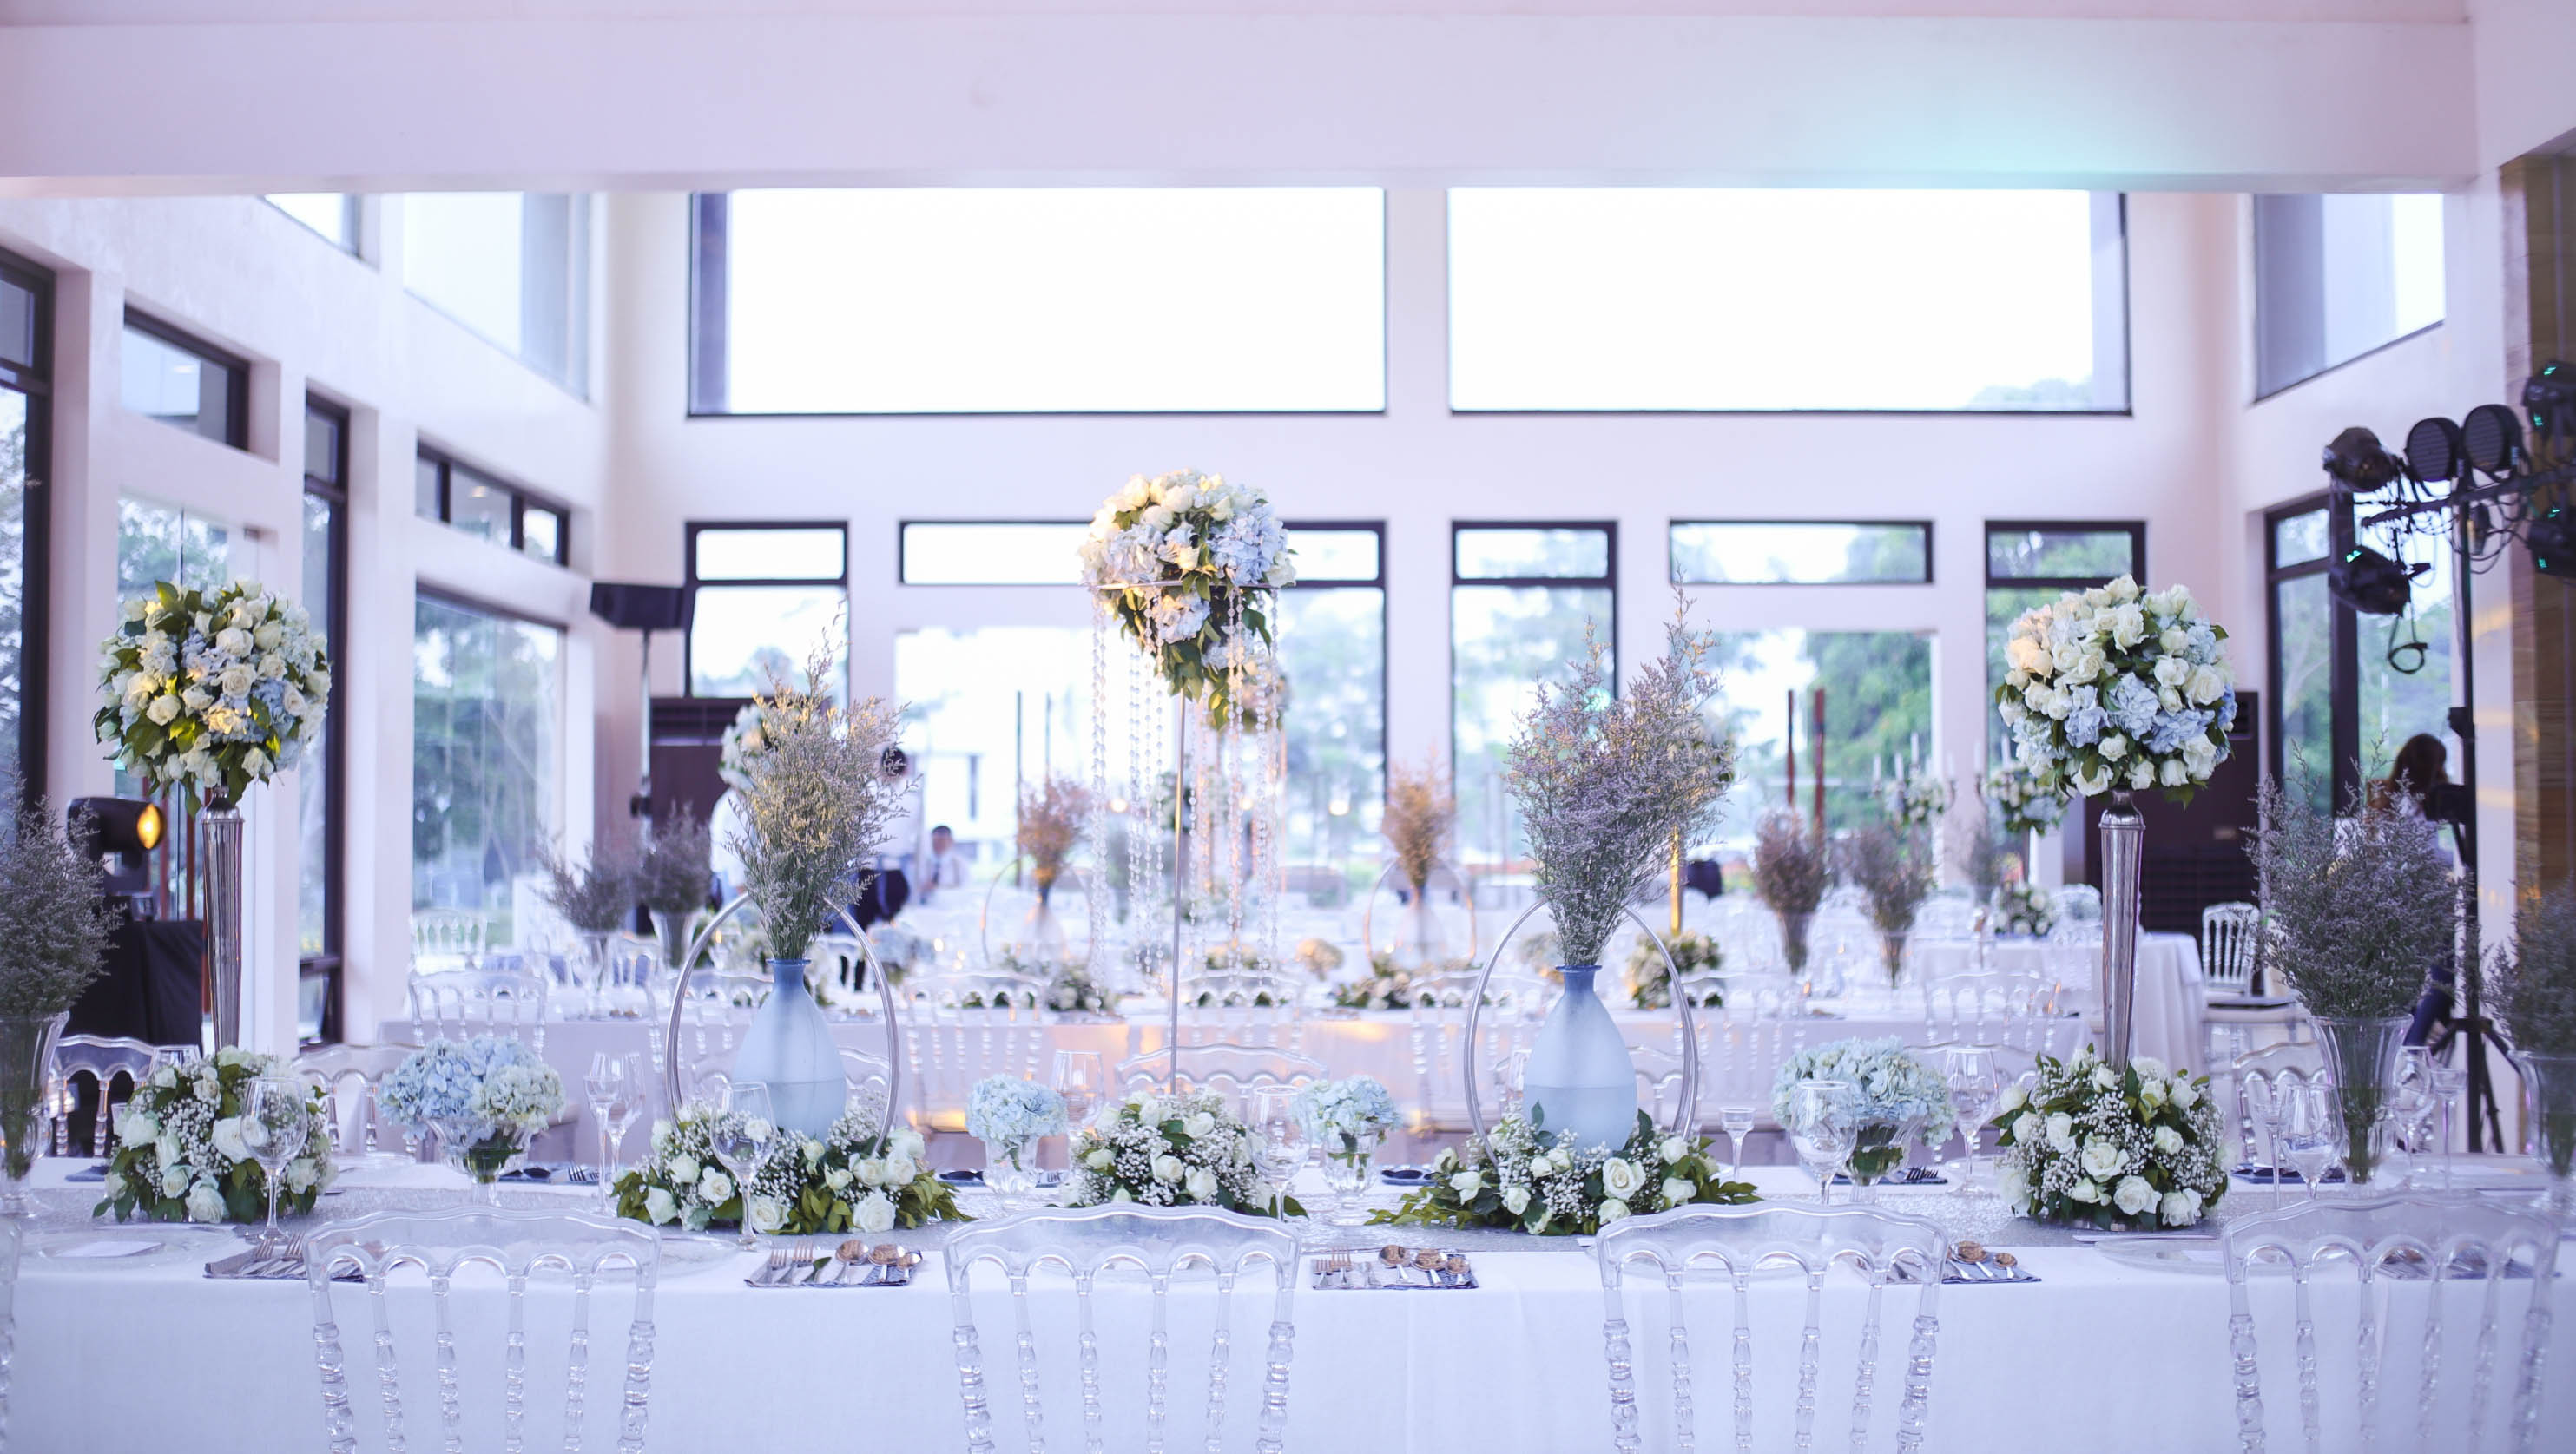 Town's Delight Catering & Events at Club Ananda Wedding Venue